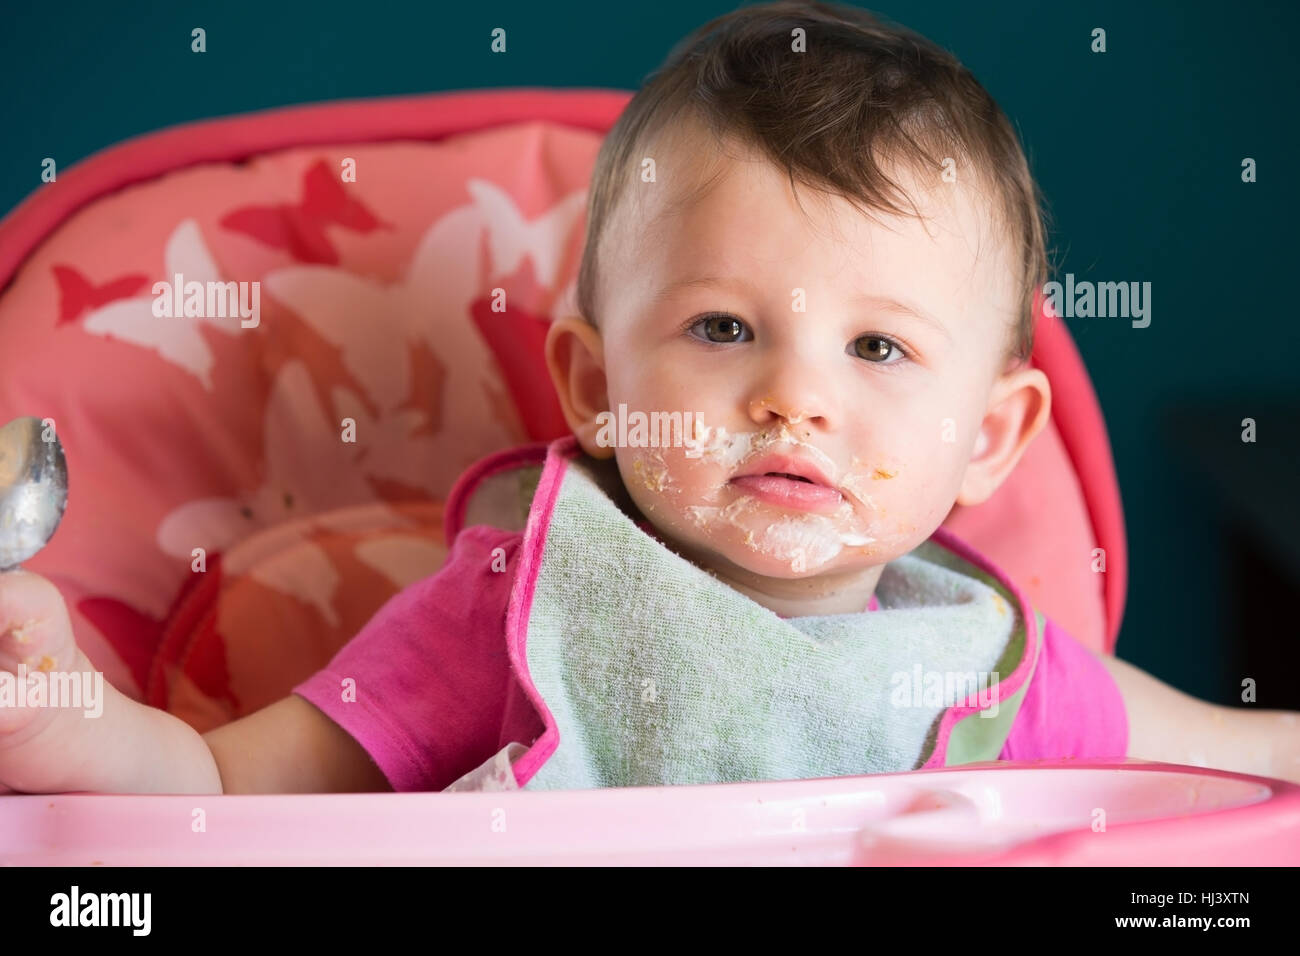 Messy Eating with Little Baby Stock Photo